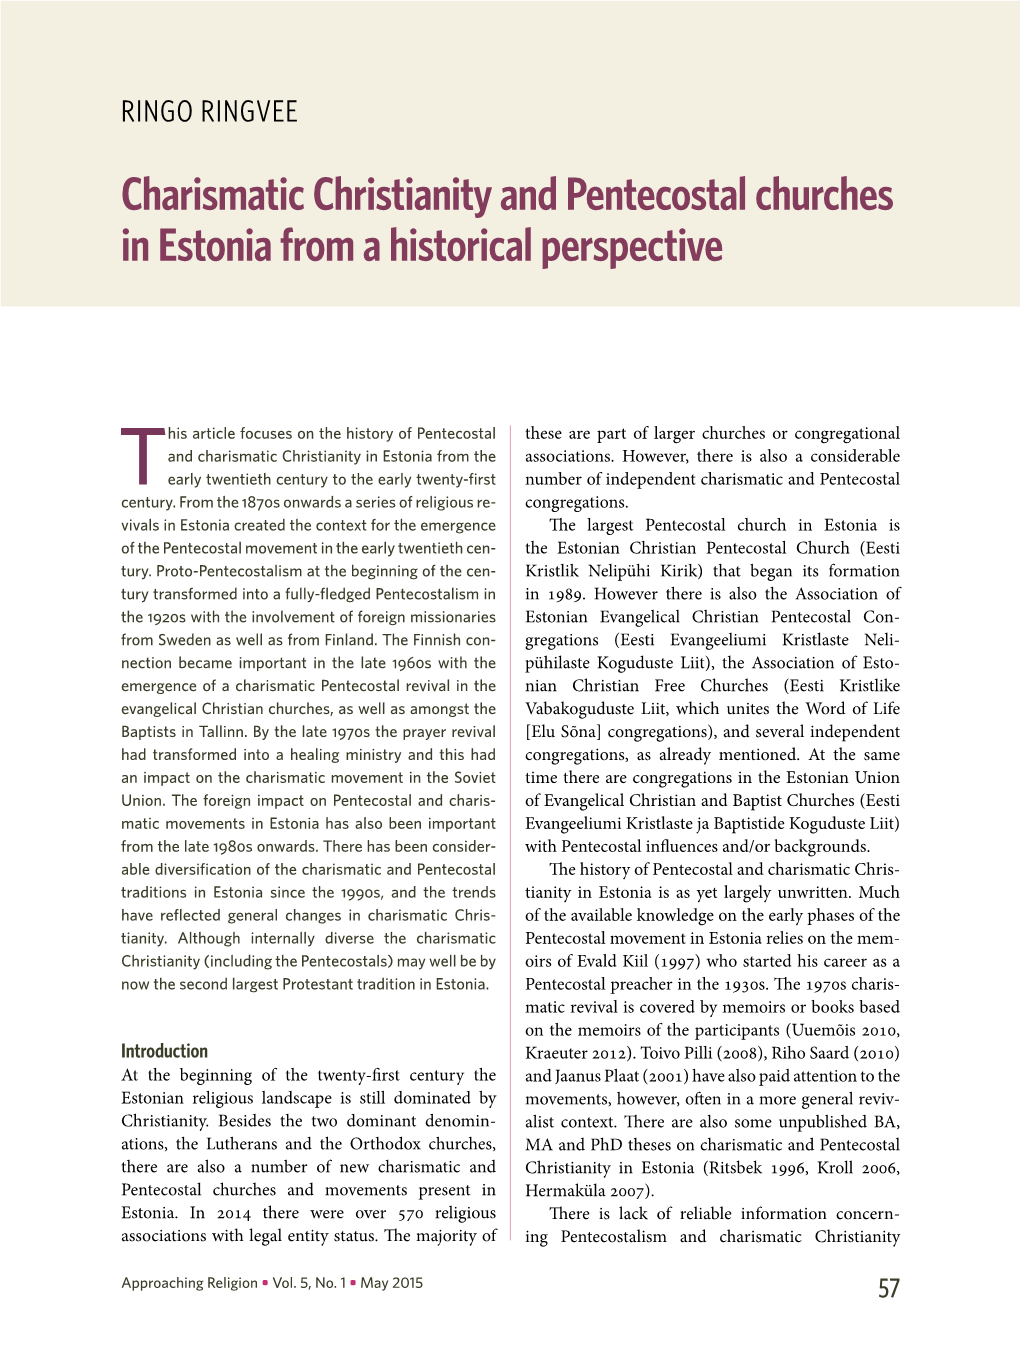 Charismatic Christianity and Pentecostal Churches in Estonia from a Historical Perspective